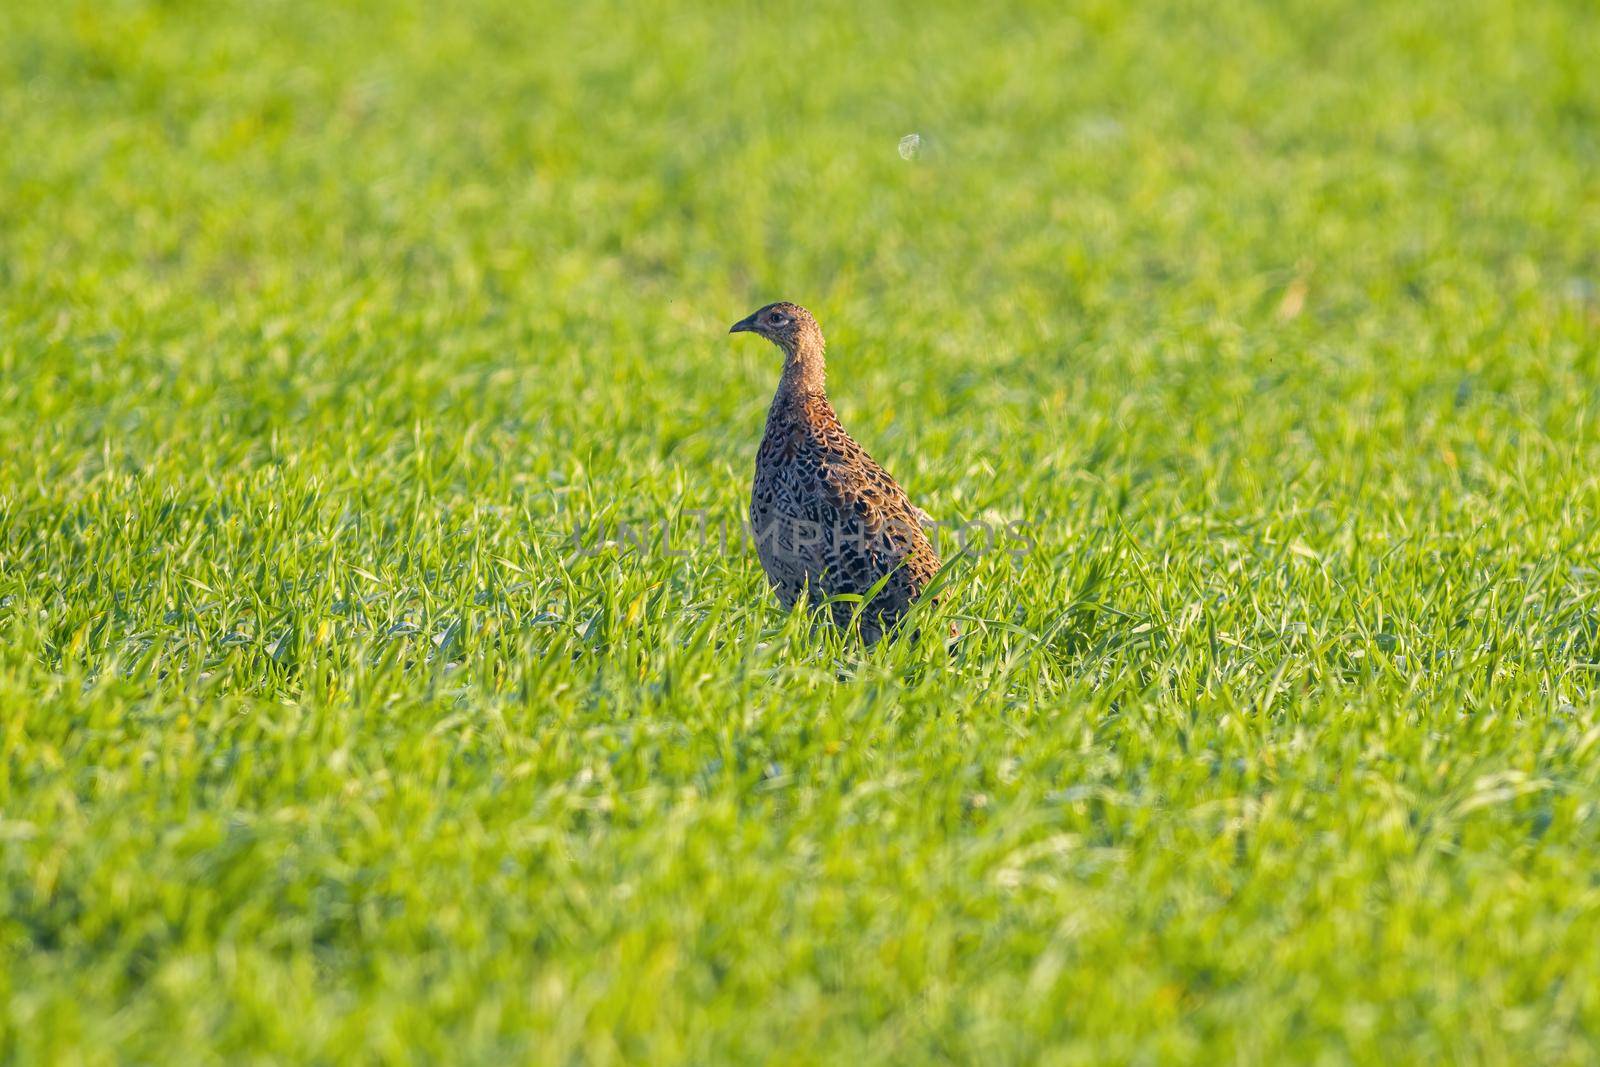 a young pheasant chicken in a meadow